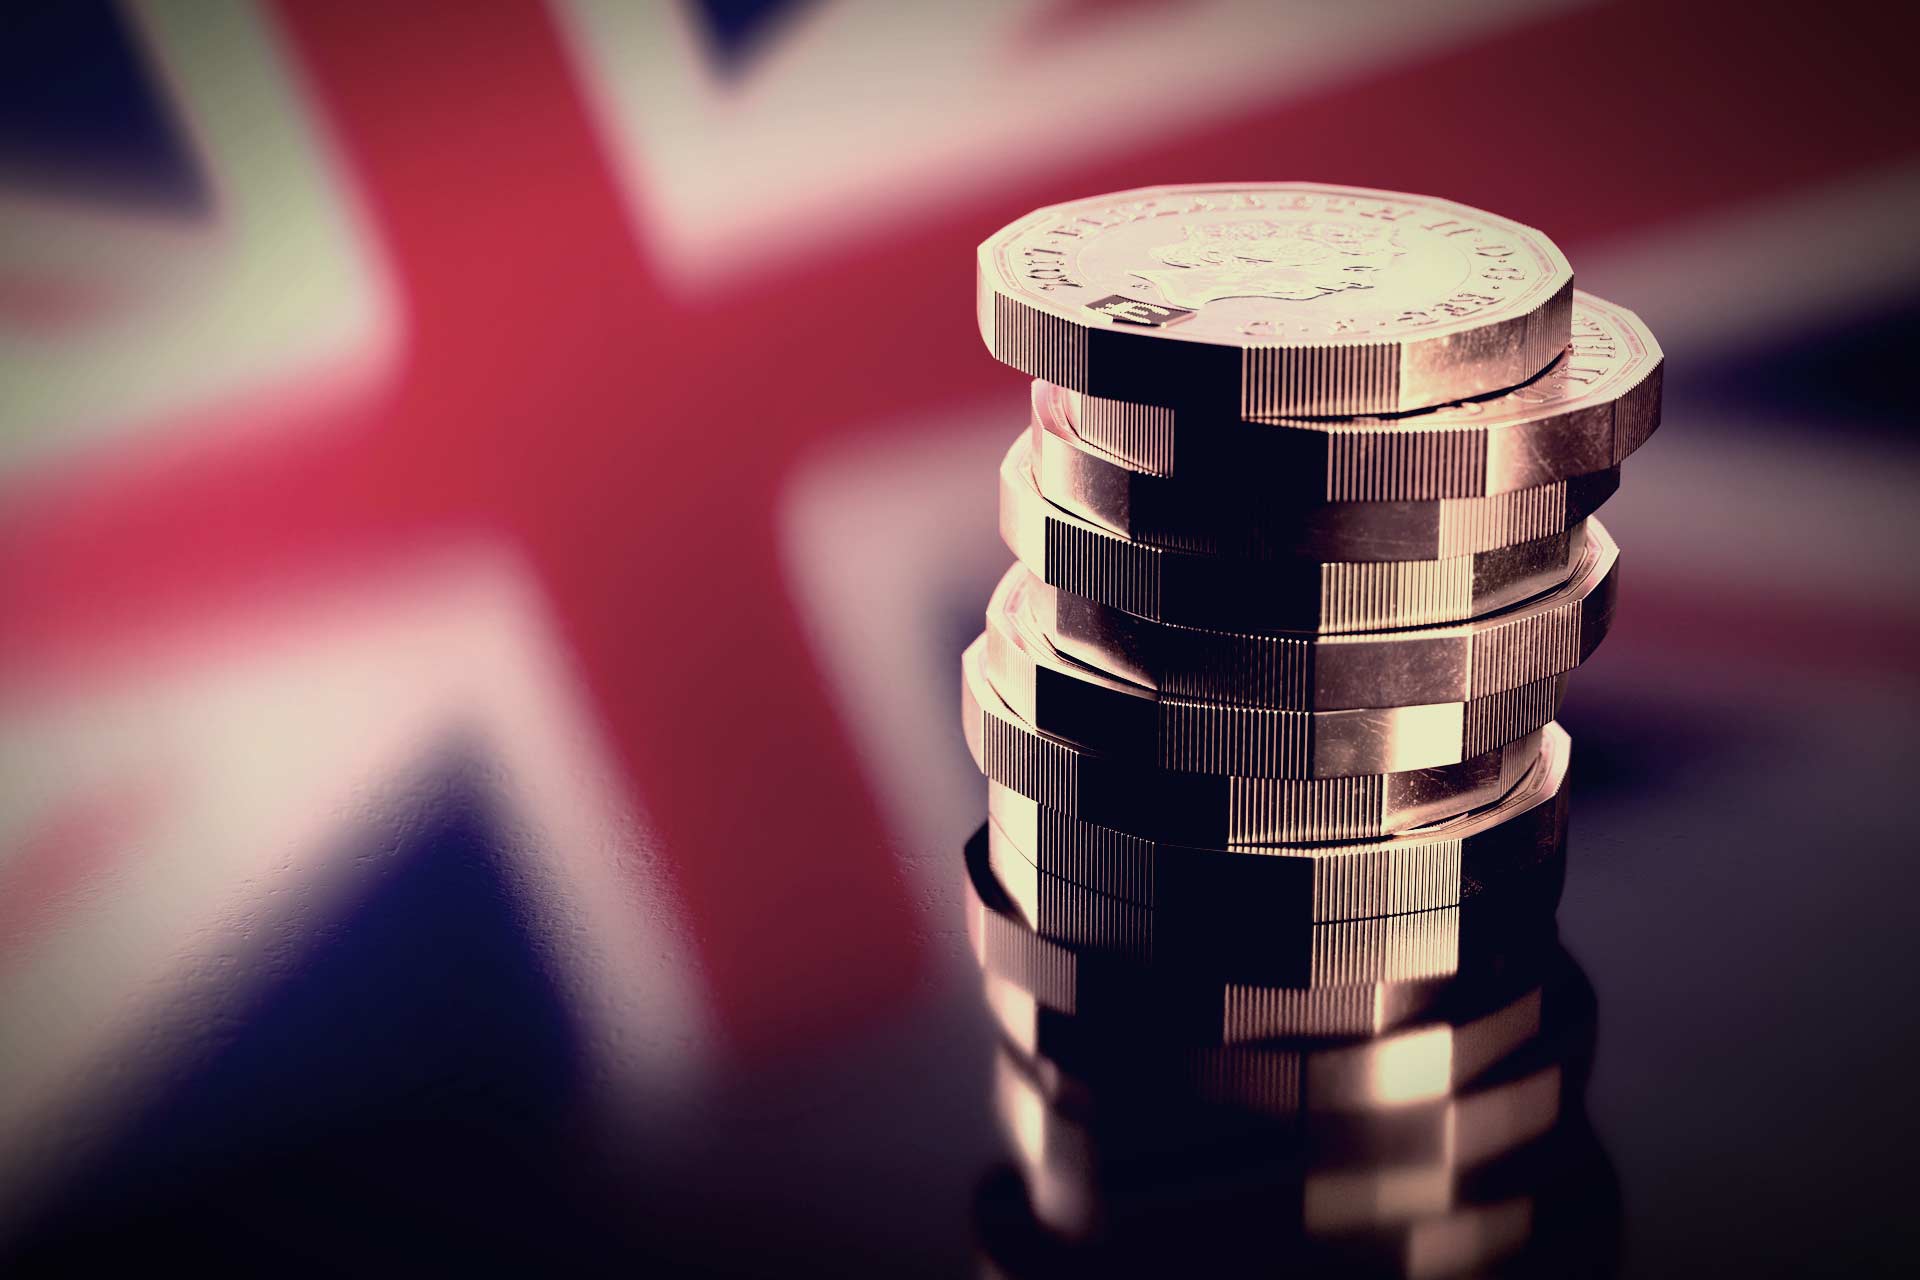 GBP breakdown risks on painful wait for EU trade deal